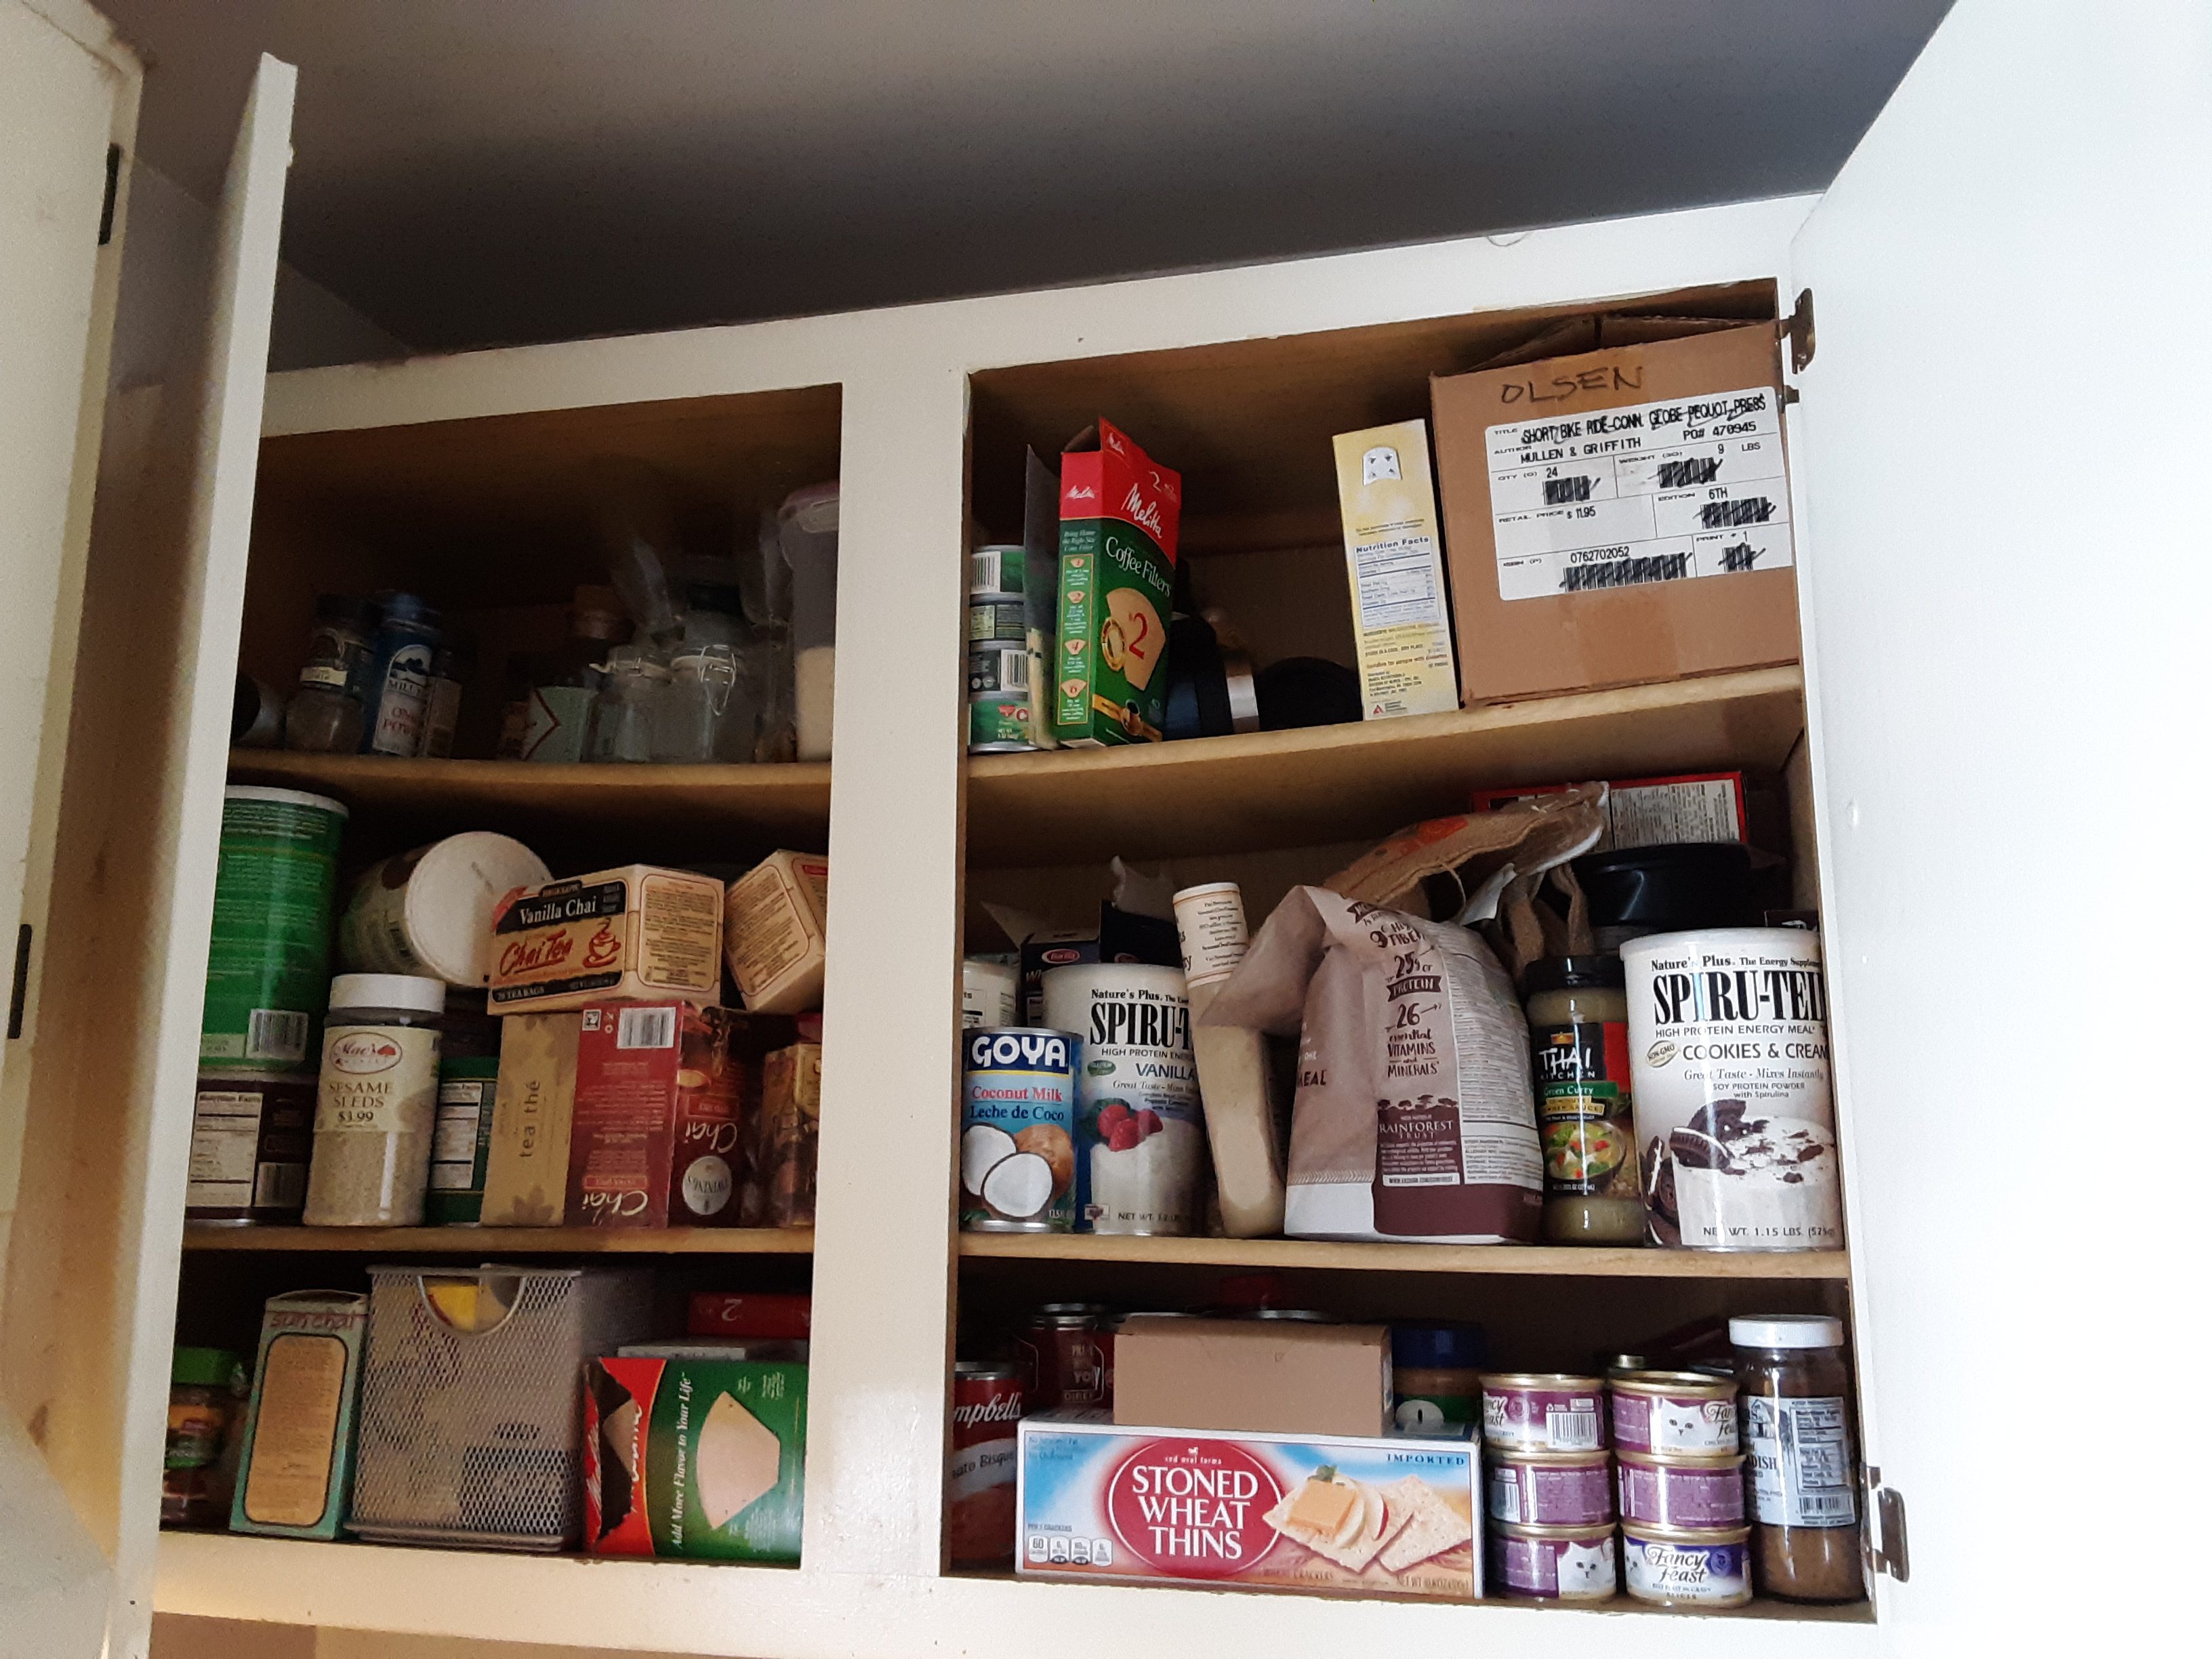 A very full kitchen cupboard before organizing it.